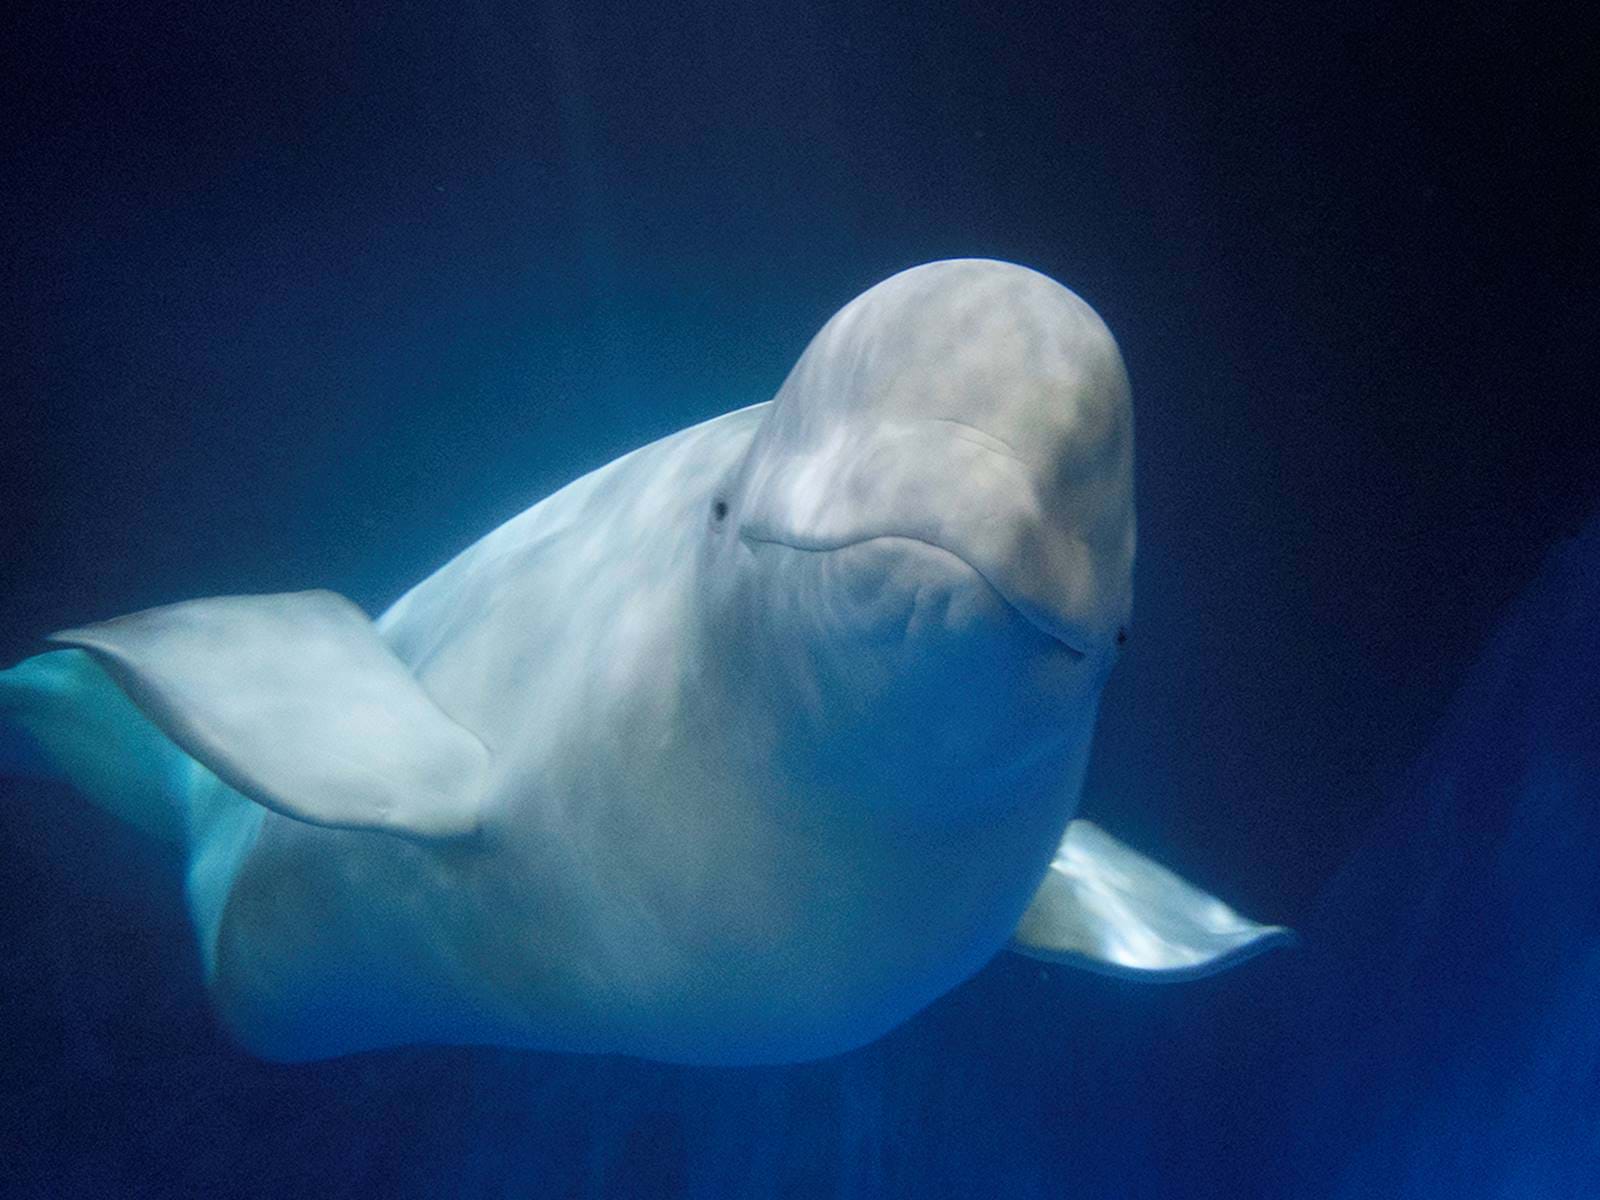 The SEA LIFE Trust operates the world's first beluga recovery station